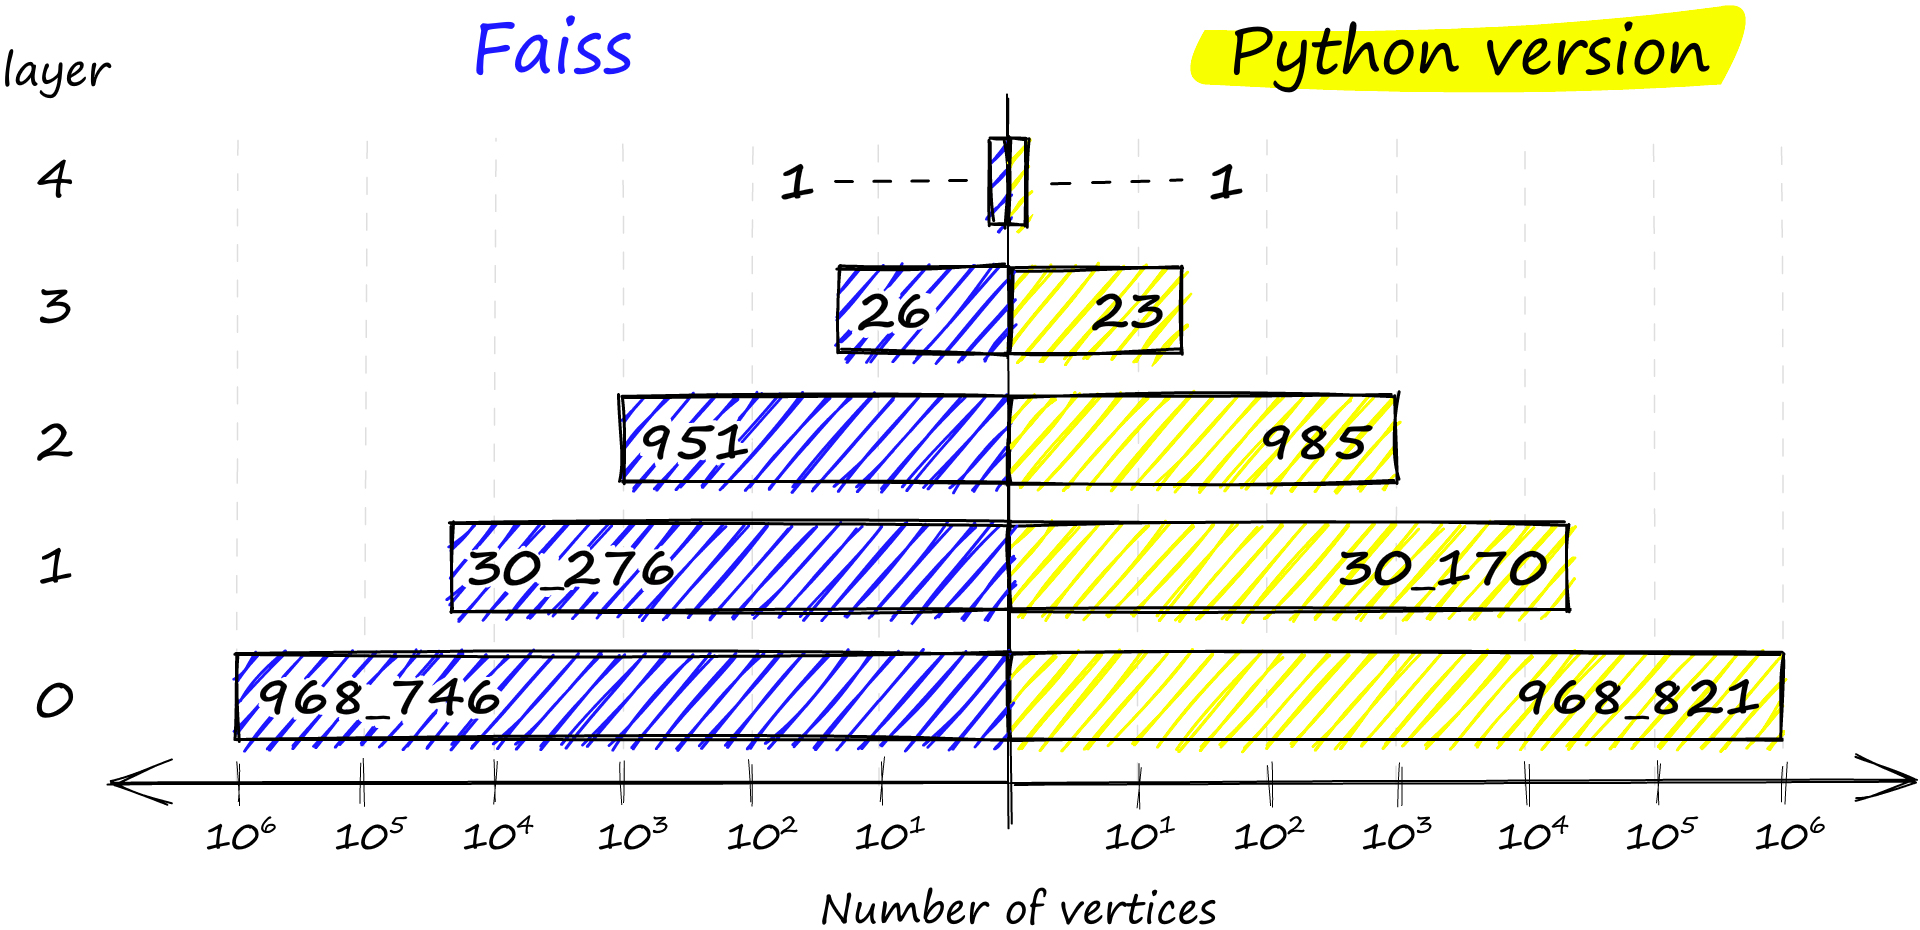 Distribution of vertices across layers in both the Faiss implementation (left) and the Python implementation (right).